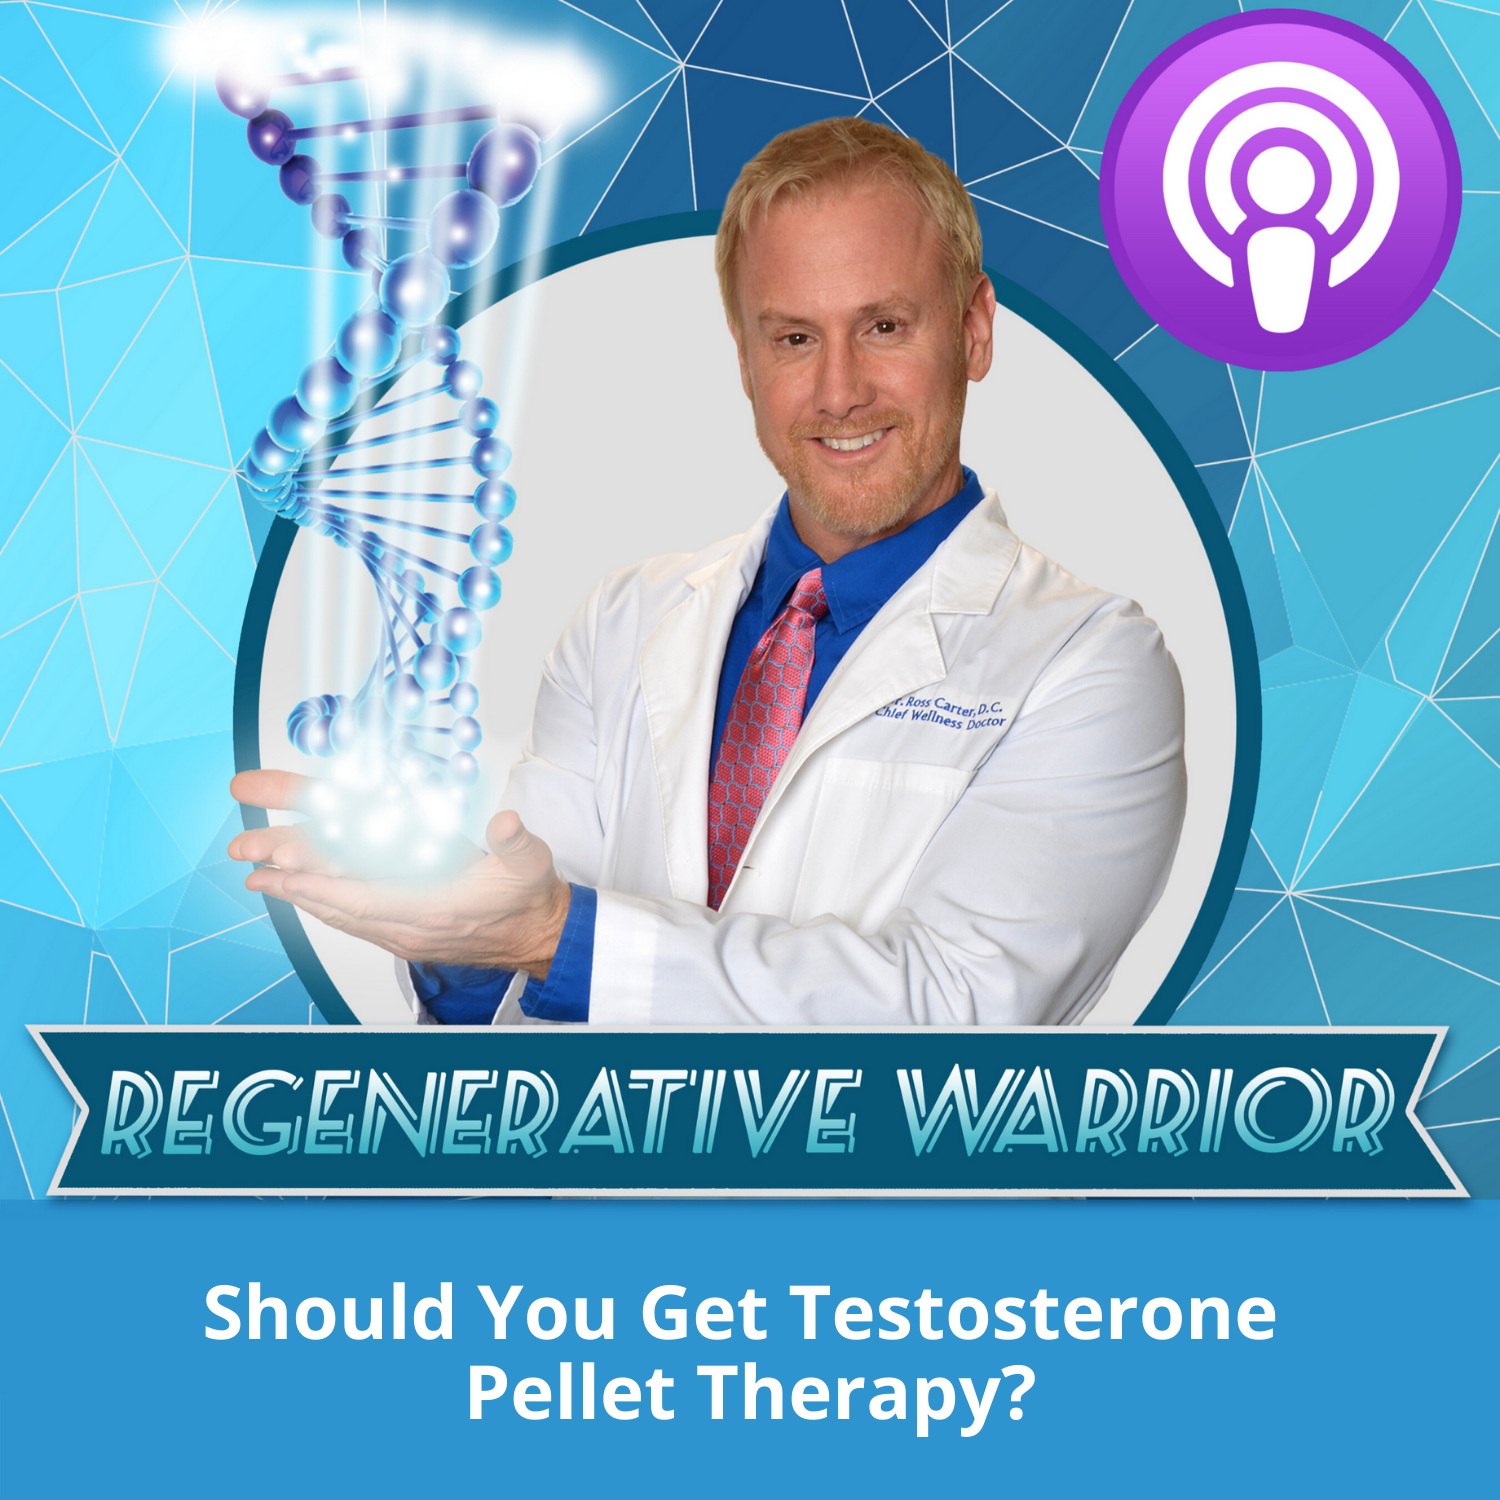 Should You Get Testosterone Pellet Therapy?